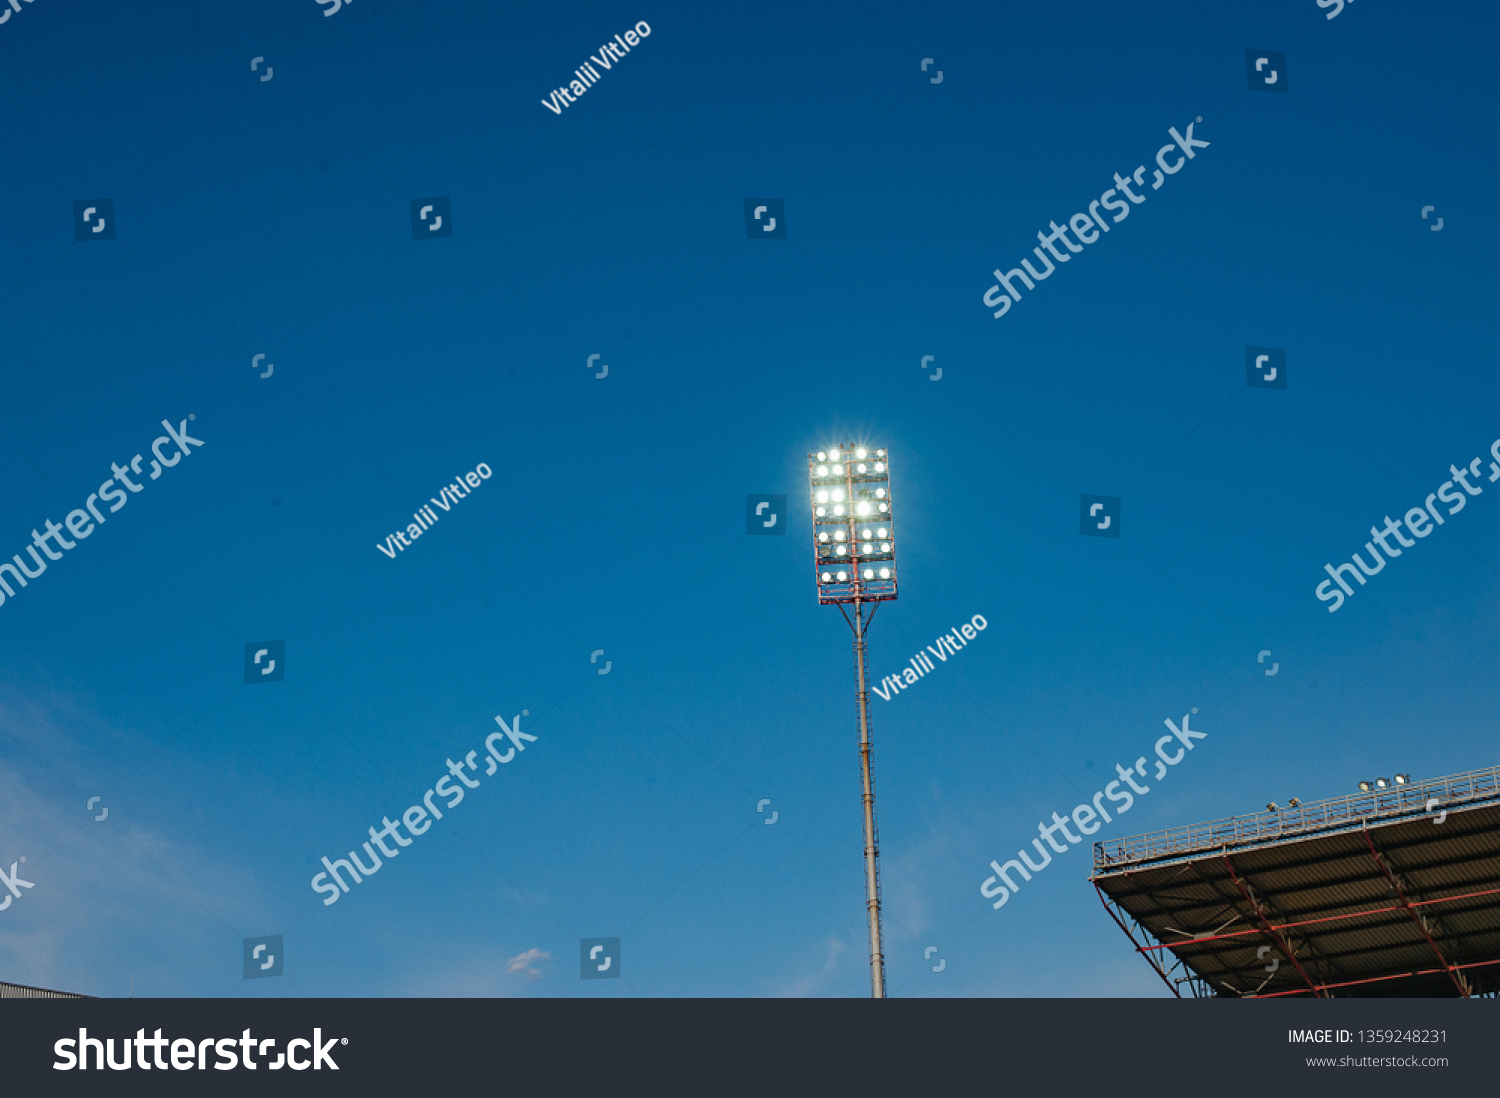 Floodlights with a metal pole for the sports arena. Tall high outdoor stadium spotlights on rigid frame construction with blue sky background #1359248231